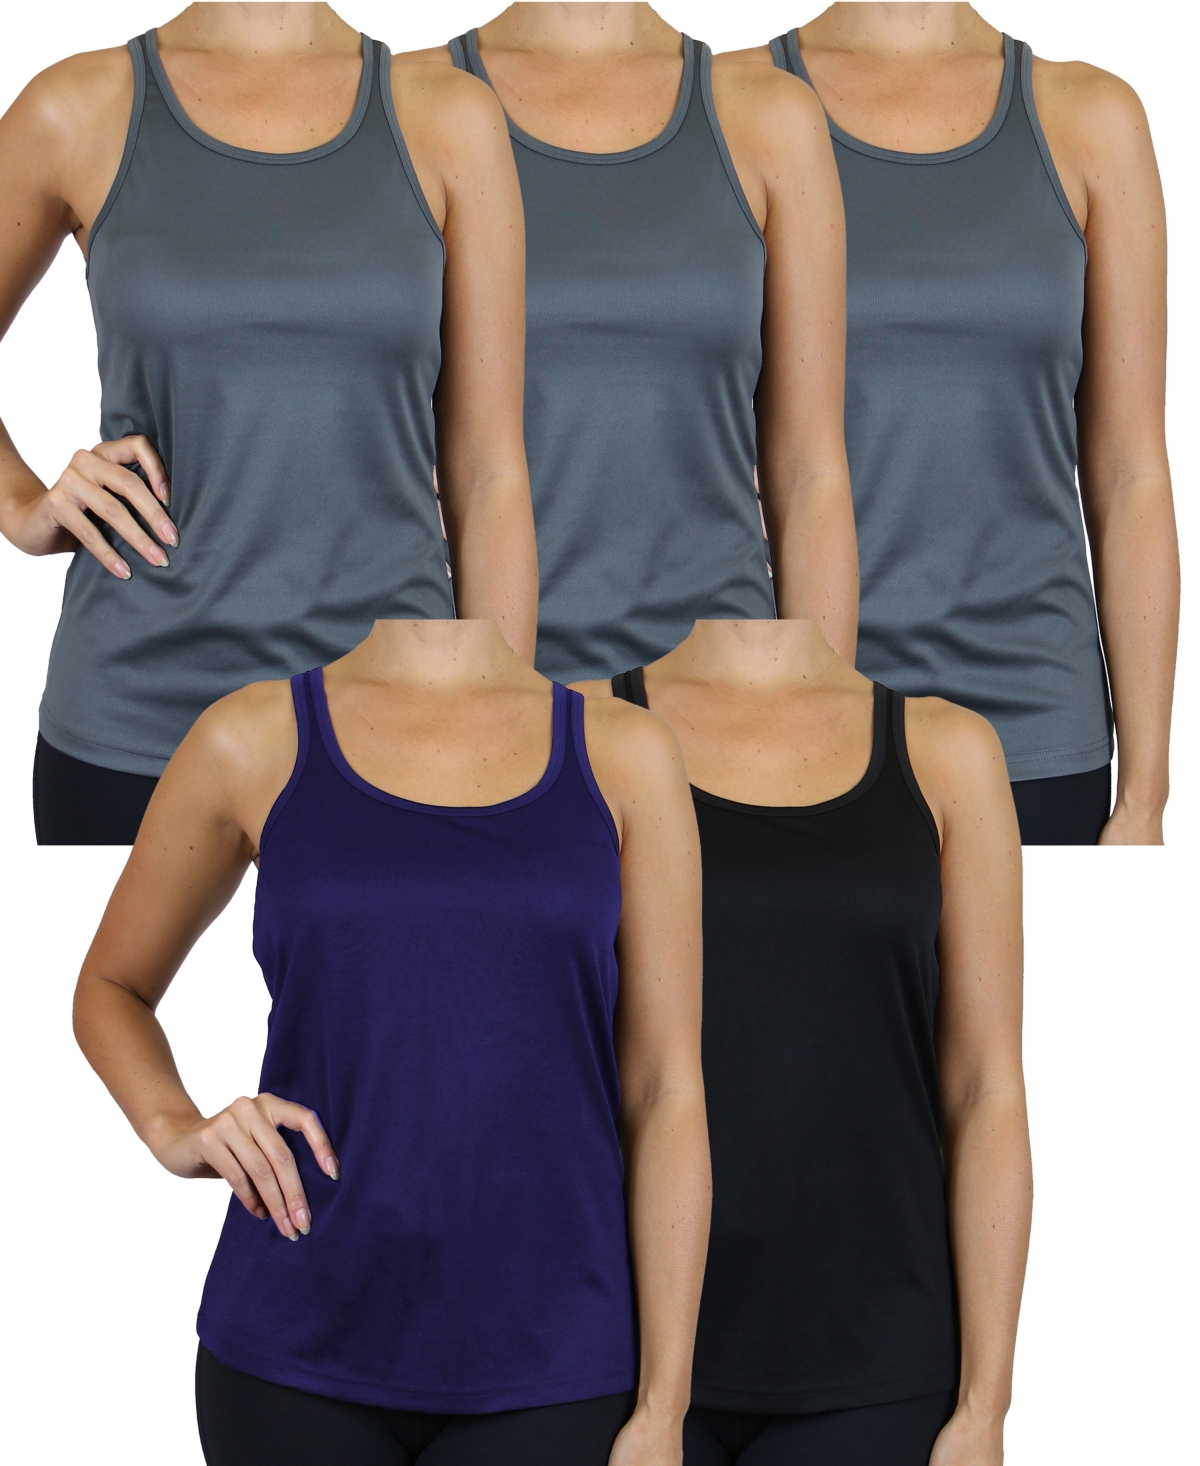 Galaxy By Harvic Women's Moisture Wicking Racerback Tanks-5 Pack In Charcoal,navy,black